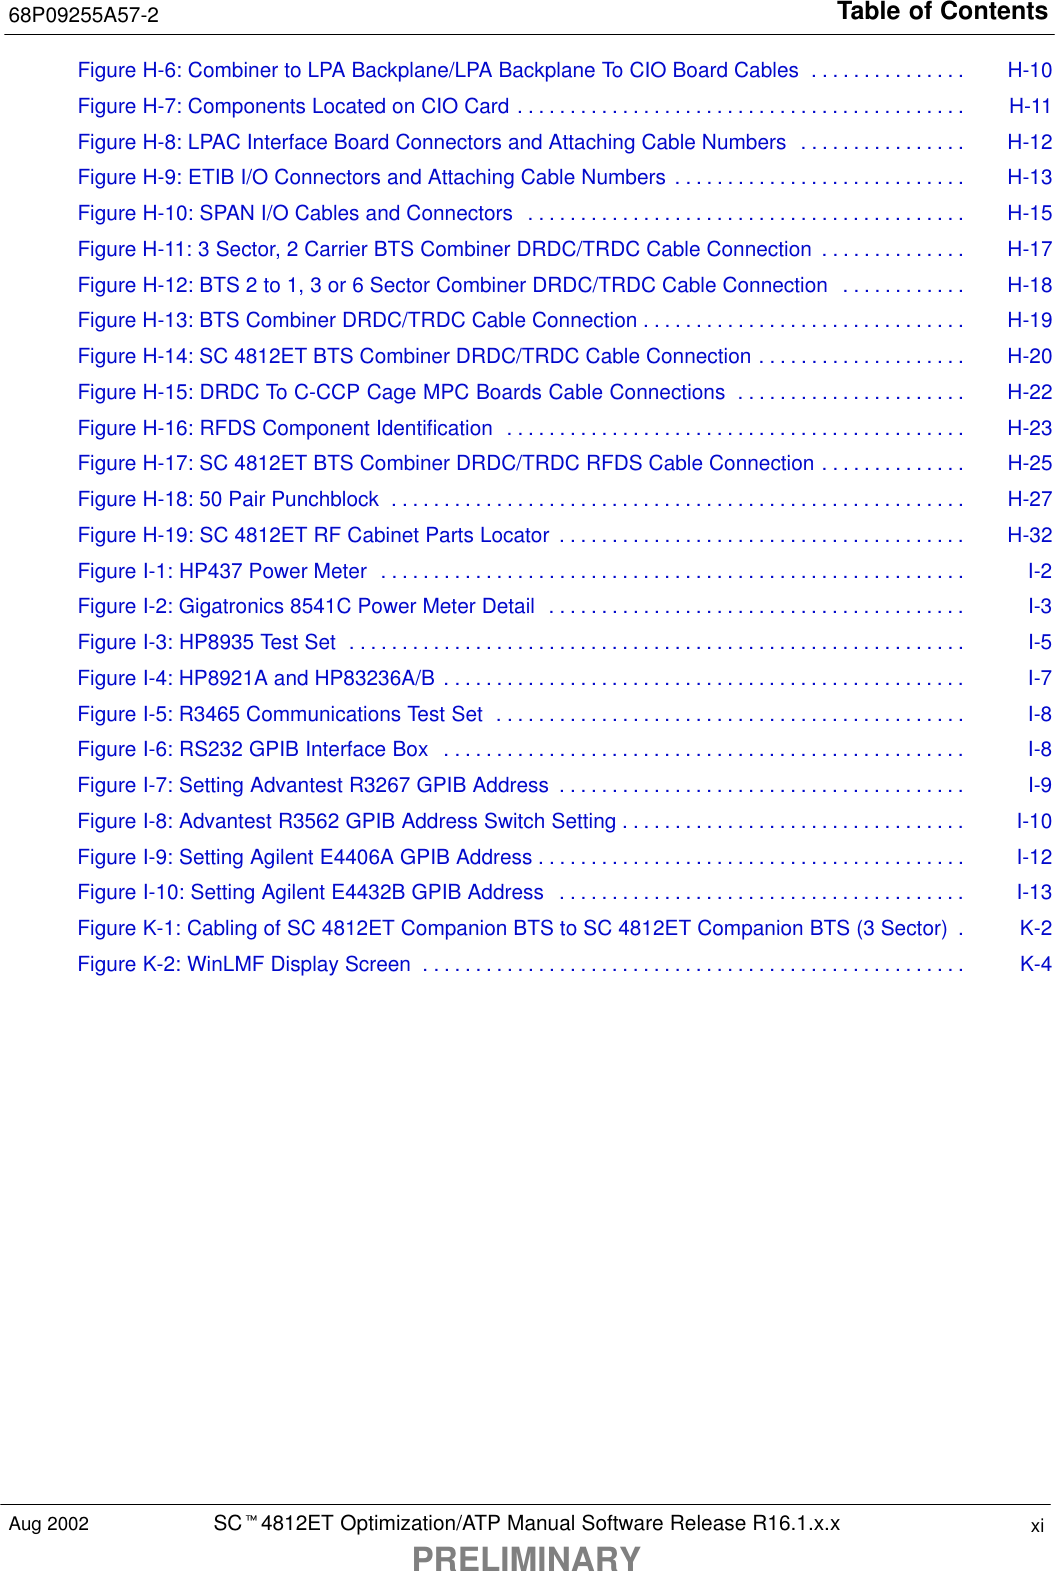 Table of Contents68P09255A57-2SCt4812ET Optimization/ATP Manual Software Release R16.1.x.xPRELIMINARYxiAug 2002Figure H-6: Combiner to LPA Backplane/LPA Backplane To CIO Board Cables H-10. . . . . . . . . . . . . . . Figure H-7: Components Located on CIO Card H-11. . . . . . . . . . . . . . . . . . . . . . . . . . . . . . . . . . . . . . . . . . . Figure H-8: LPAC Interface Board Connectors and Attaching Cable Numbers H-12. . . . . . . . . . . . . . . . Figure H-9: ETIB I/O Connectors and Attaching Cable Numbers H-13. . . . . . . . . . . . . . . . . . . . . . . . . . . . Figure H-10: SPAN I/O Cables and Connectors H-15. . . . . . . . . . . . . . . . . . . . . . . . . . . . . . . . . . . . . . . . . . Figure H-11: 3 Sector, 2 Carrier BTS Combiner DRDC/TRDC Cable Connection H-17. . . . . . . . . . . . . . Figure H-12: BTS 2 to 1, 3 or 6 Sector Combiner DRDC/TRDC Cable Connection H-18. . . . . . . . . . . . Figure H-13: BTS Combiner DRDC/TRDC Cable Connection H-19. . . . . . . . . . . . . . . . . . . . . . . . . . . . . . . Figure H-14: SC 4812ET BTS Combiner DRDC/TRDC Cable Connection H-20. . . . . . . . . . . . . . . . . . . . Figure H-15: DRDC To C-CCP Cage MPC Boards Cable Connections H-22. . . . . . . . . . . . . . . . . . . . . . Figure H-16: RFDS Component Identification H-23. . . . . . . . . . . . . . . . . . . . . . . . . . . . . . . . . . . . . . . . . . . . Figure H-17: SC 4812ET BTS Combiner DRDC/TRDC RFDS Cable Connection H-25. . . . . . . . . . . . . . Figure H-18: 50 Pair Punchblock H-27. . . . . . . . . . . . . . . . . . . . . . . . . . . . . . . . . . . . . . . . . . . . . . . . . . . . . . . Figure H-19: SC 4812ET RF Cabinet Parts Locator H-32. . . . . . . . . . . . . . . . . . . . . . . . . . . . . . . . . . . . . . . Figure I-1: HP437 Power Meter I-2. . . . . . . . . . . . . . . . . . . . . . . . . . . . . . . . . . . . . . . . . . . . . . . . . . . . . . . . Figure I-2: Gigatronics 8541C Power Meter Detail I-3. . . . . . . . . . . . . . . . . . . . . . . . . . . . . . . . . . . . . . . . Figure I-3: HP8935 Test Set I-5. . . . . . . . . . . . . . . . . . . . . . . . . . . . . . . . . . . . . . . . . . . . . . . . . . . . . . . . . . . Figure I-4: HP8921A and HP83236A/B I-7. . . . . . . . . . . . . . . . . . . . . . . . . . . . . . . . . . . . . . . . . . . . . . . . . . Figure I-5: R3465 Communications Test Set I-8. . . . . . . . . . . . . . . . . . . . . . . . . . . . . . . . . . . . . . . . . . . . . Figure I-6: RS232 GPIB Interface Box I-8. . . . . . . . . . . . . . . . . . . . . . . . . . . . . . . . . . . . . . . . . . . . . . . . . . Figure I-7: Setting Advantest R3267 GPIB Address I-9. . . . . . . . . . . . . . . . . . . . . . . . . . . . . . . . . . . . . . . Figure I-8: Advantest R3562 GPIB Address Switch Setting I-10. . . . . . . . . . . . . . . . . . . . . . . . . . . . . . . . . Figure I-9: Setting Agilent E4406A GPIB Address I-12. . . . . . . . . . . . . . . . . . . . . . . . . . . . . . . . . . . . . . . . . Figure I-10: Setting Agilent E4432B GPIB Address I-13. . . . . . . . . . . . . . . . . . . . . . . . . . . . . . . . . . . . . . . Figure K-1: Cabling of SC 4812ET Companion BTS to SC 4812ET Companion BTS (3 Sector) K-2. Figure K-2: WinLMF Display Screen K-4. . . . . . . . . . . . . . . . . . . . . . . . . . . . . . . . . . . . . . . . . . . . . . . . . . . . 